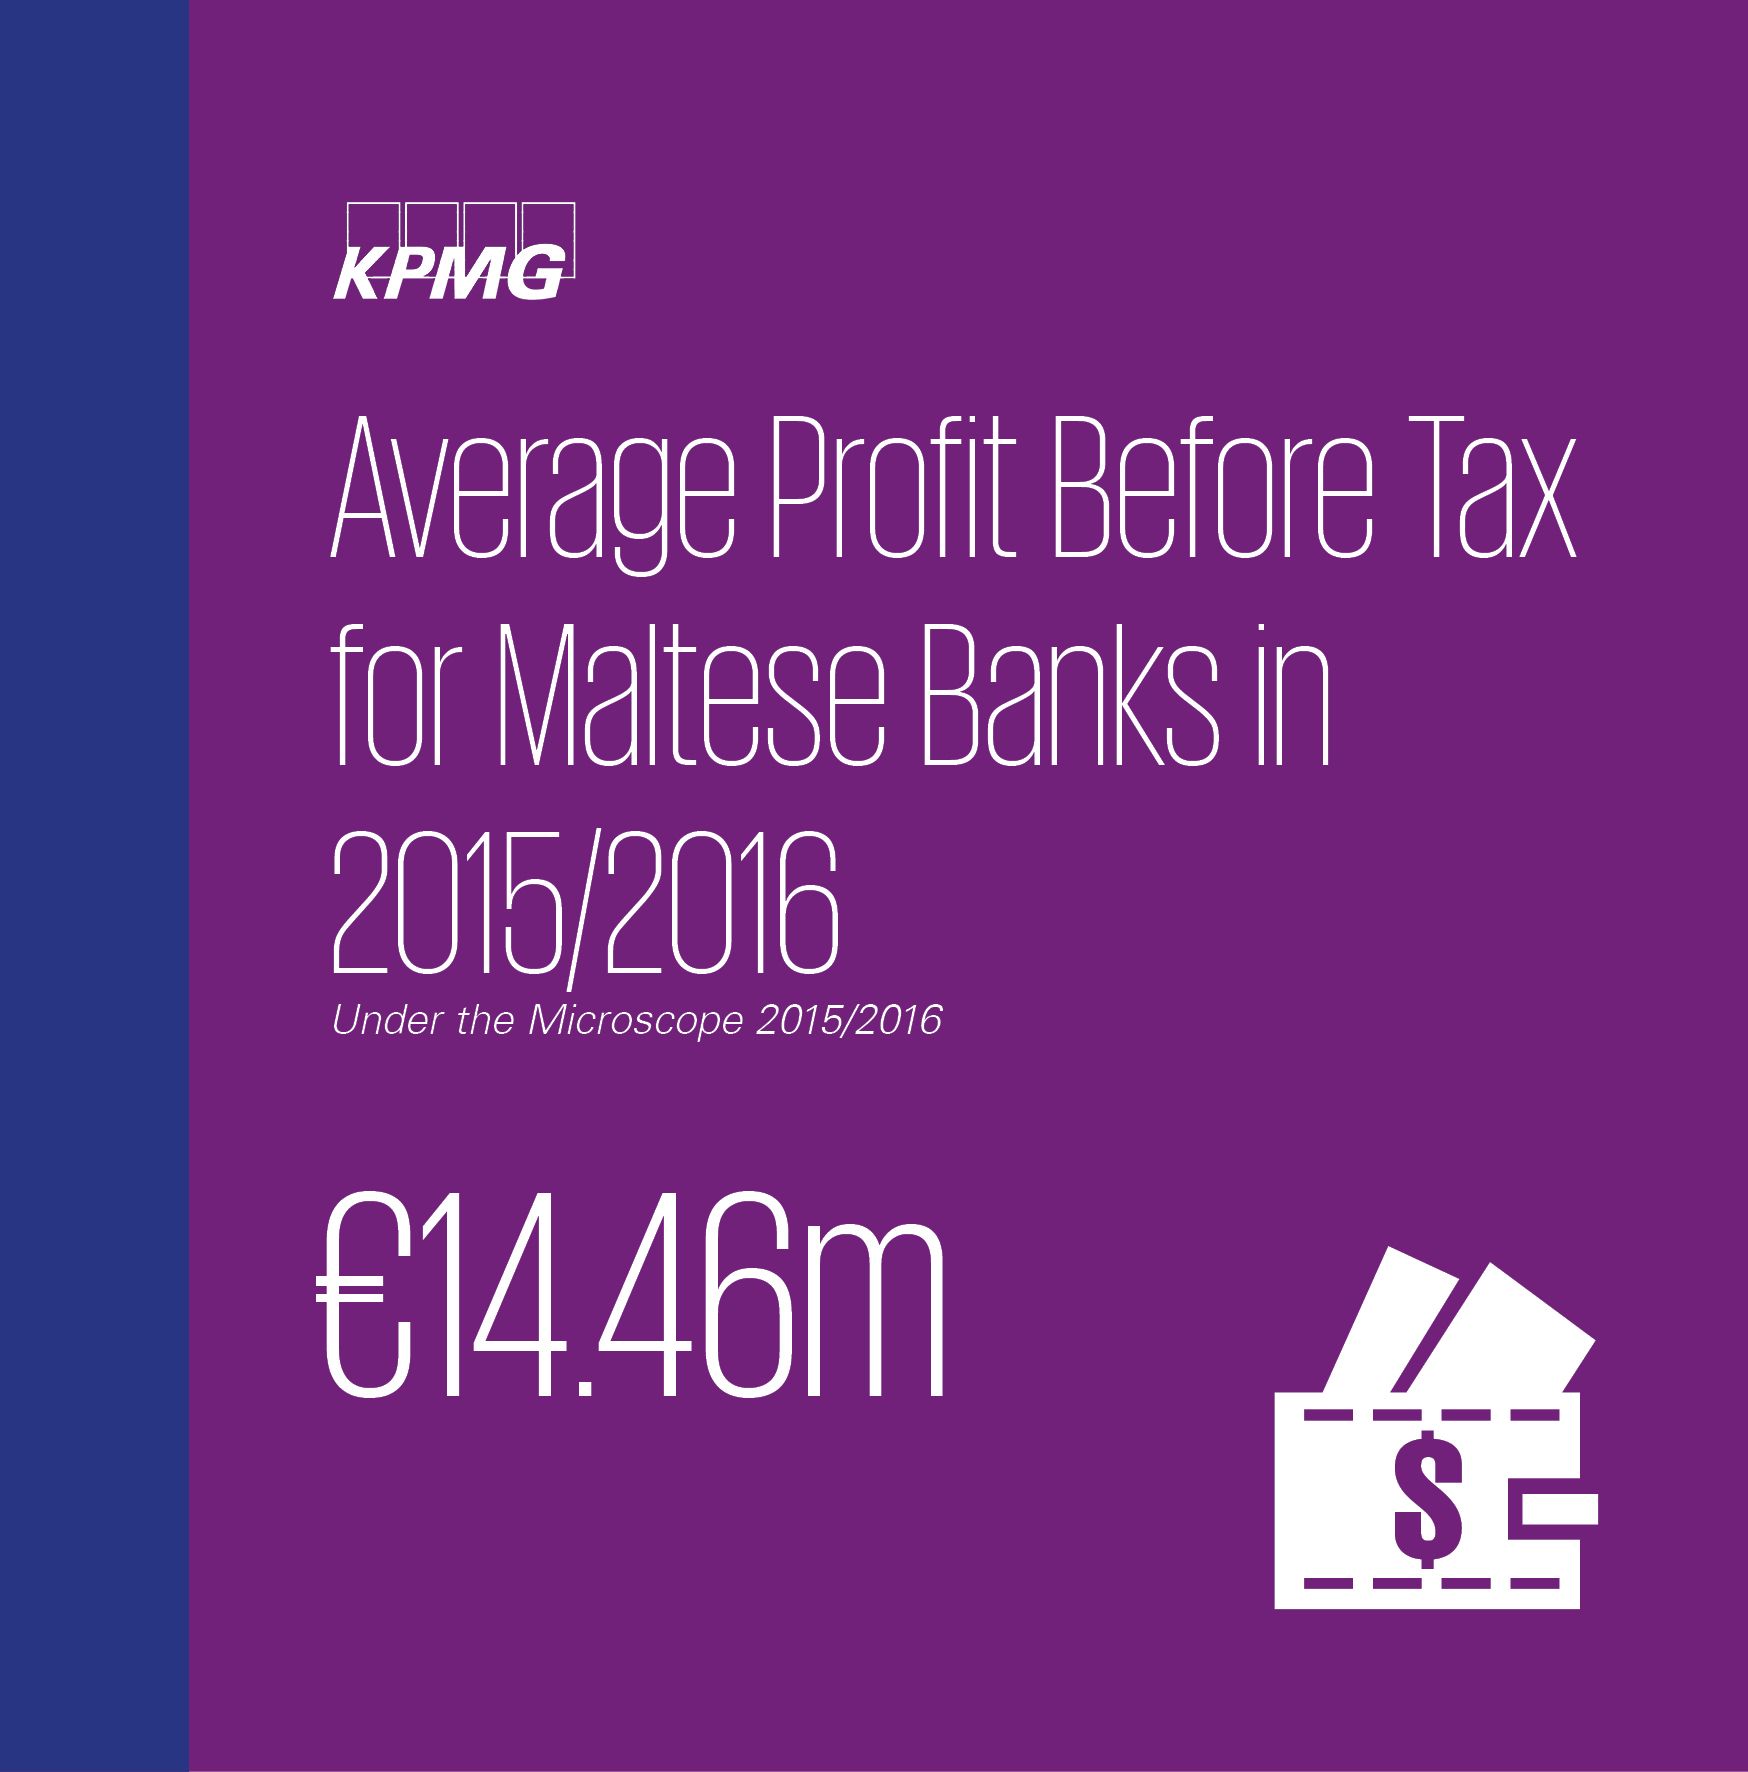 Average Profit Before Tax for Maltese Banks in 2015/2016